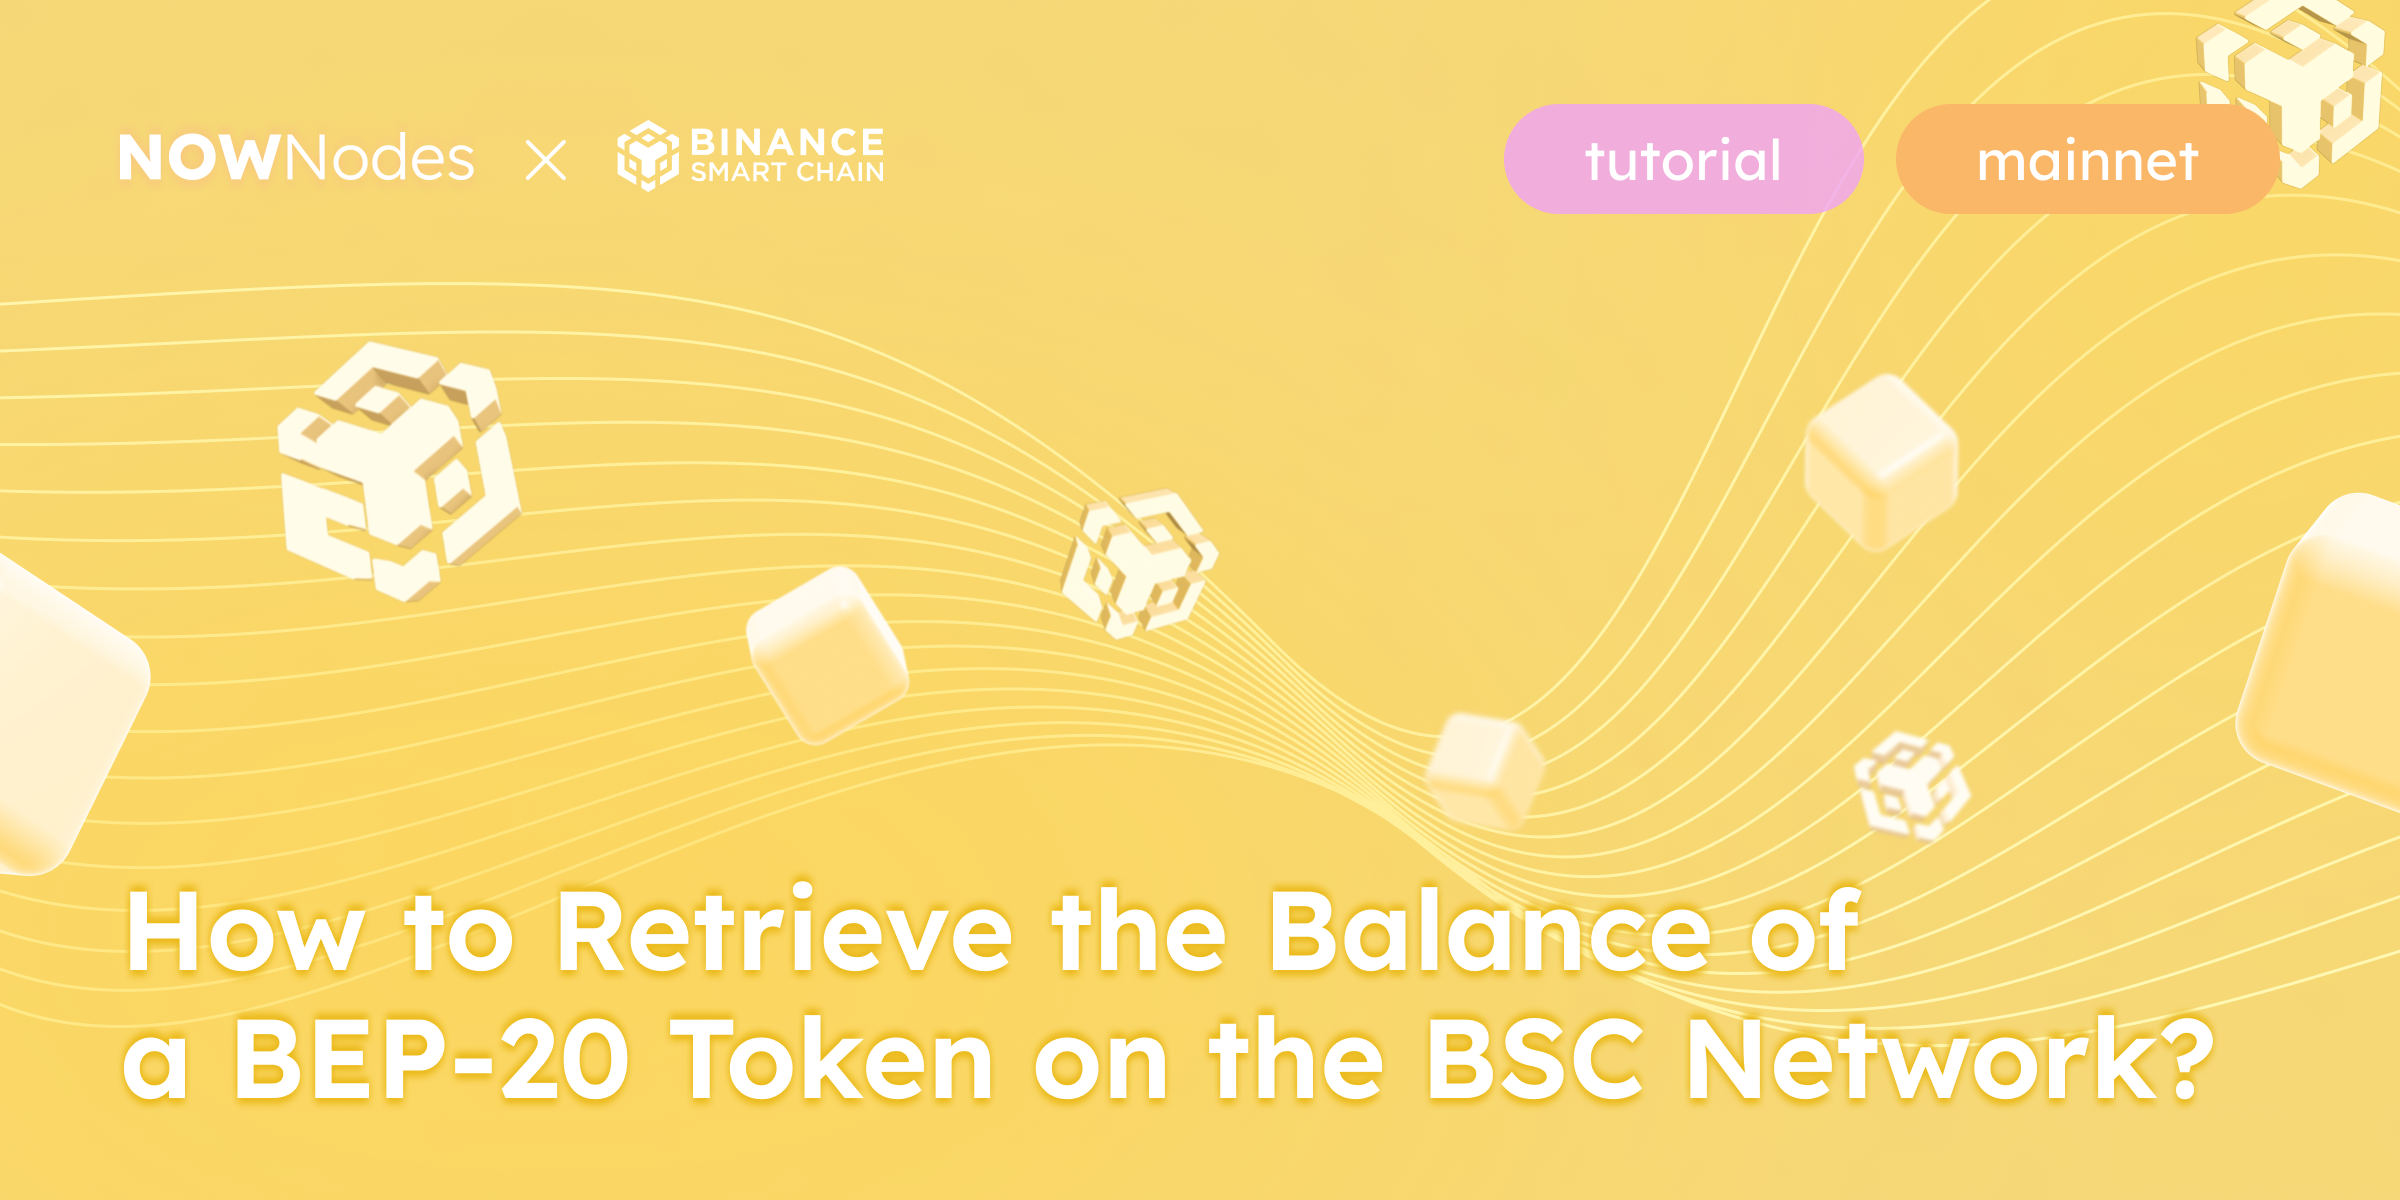 How to Retrieve the Balance of a BEP-20 Token on the BSC Network